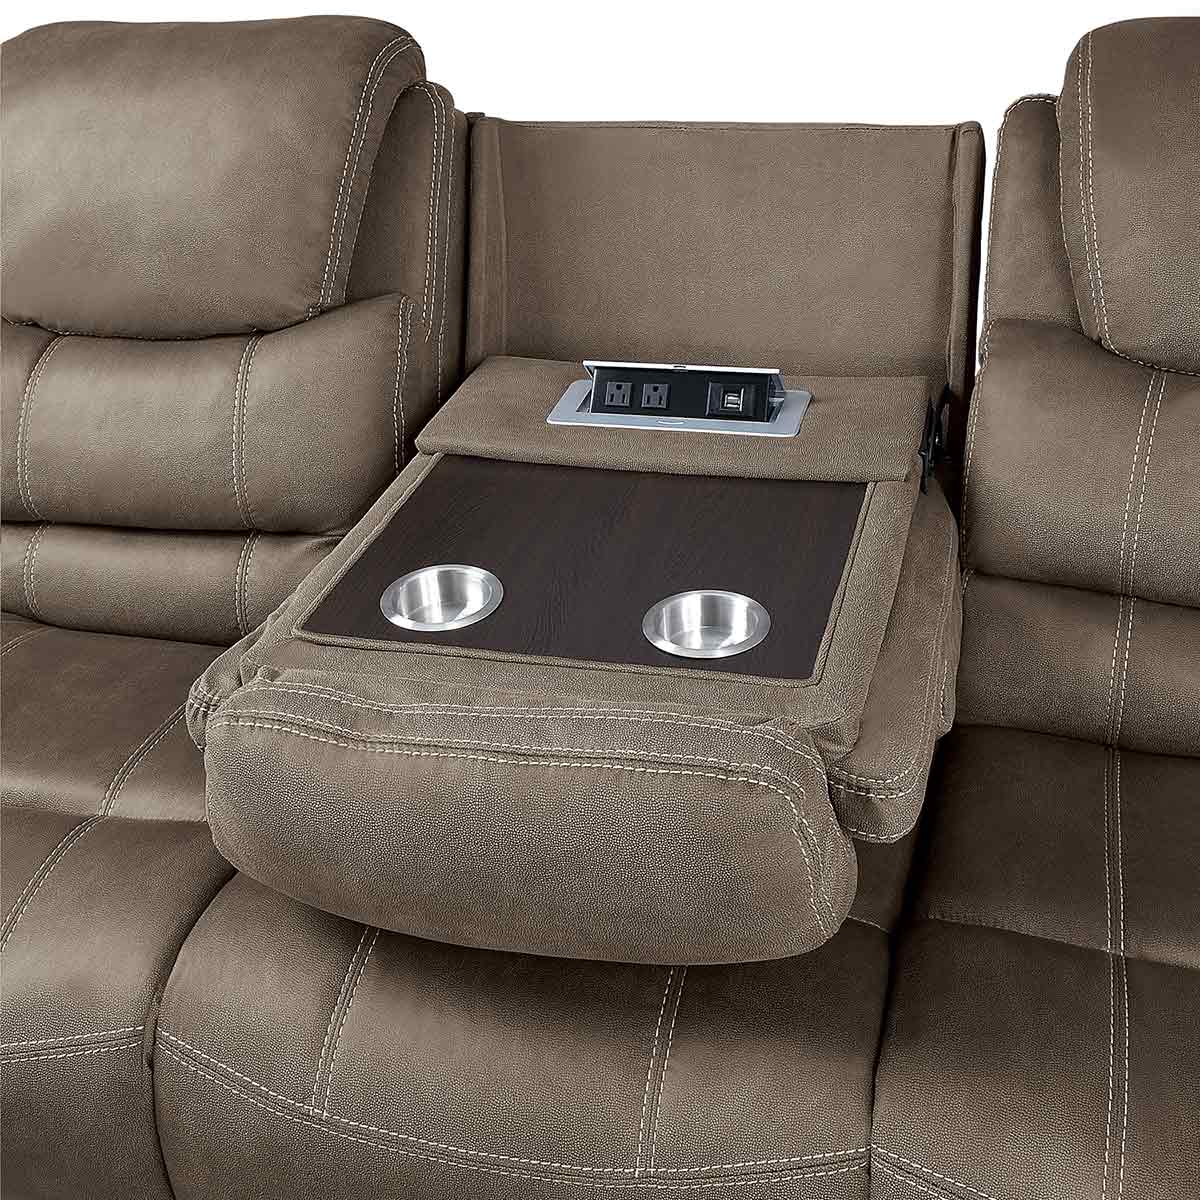 Homelegance Shola Power Double Reclining Sofa with Power Headrests, Drop-Down Cup holders and Receptacles - Brown